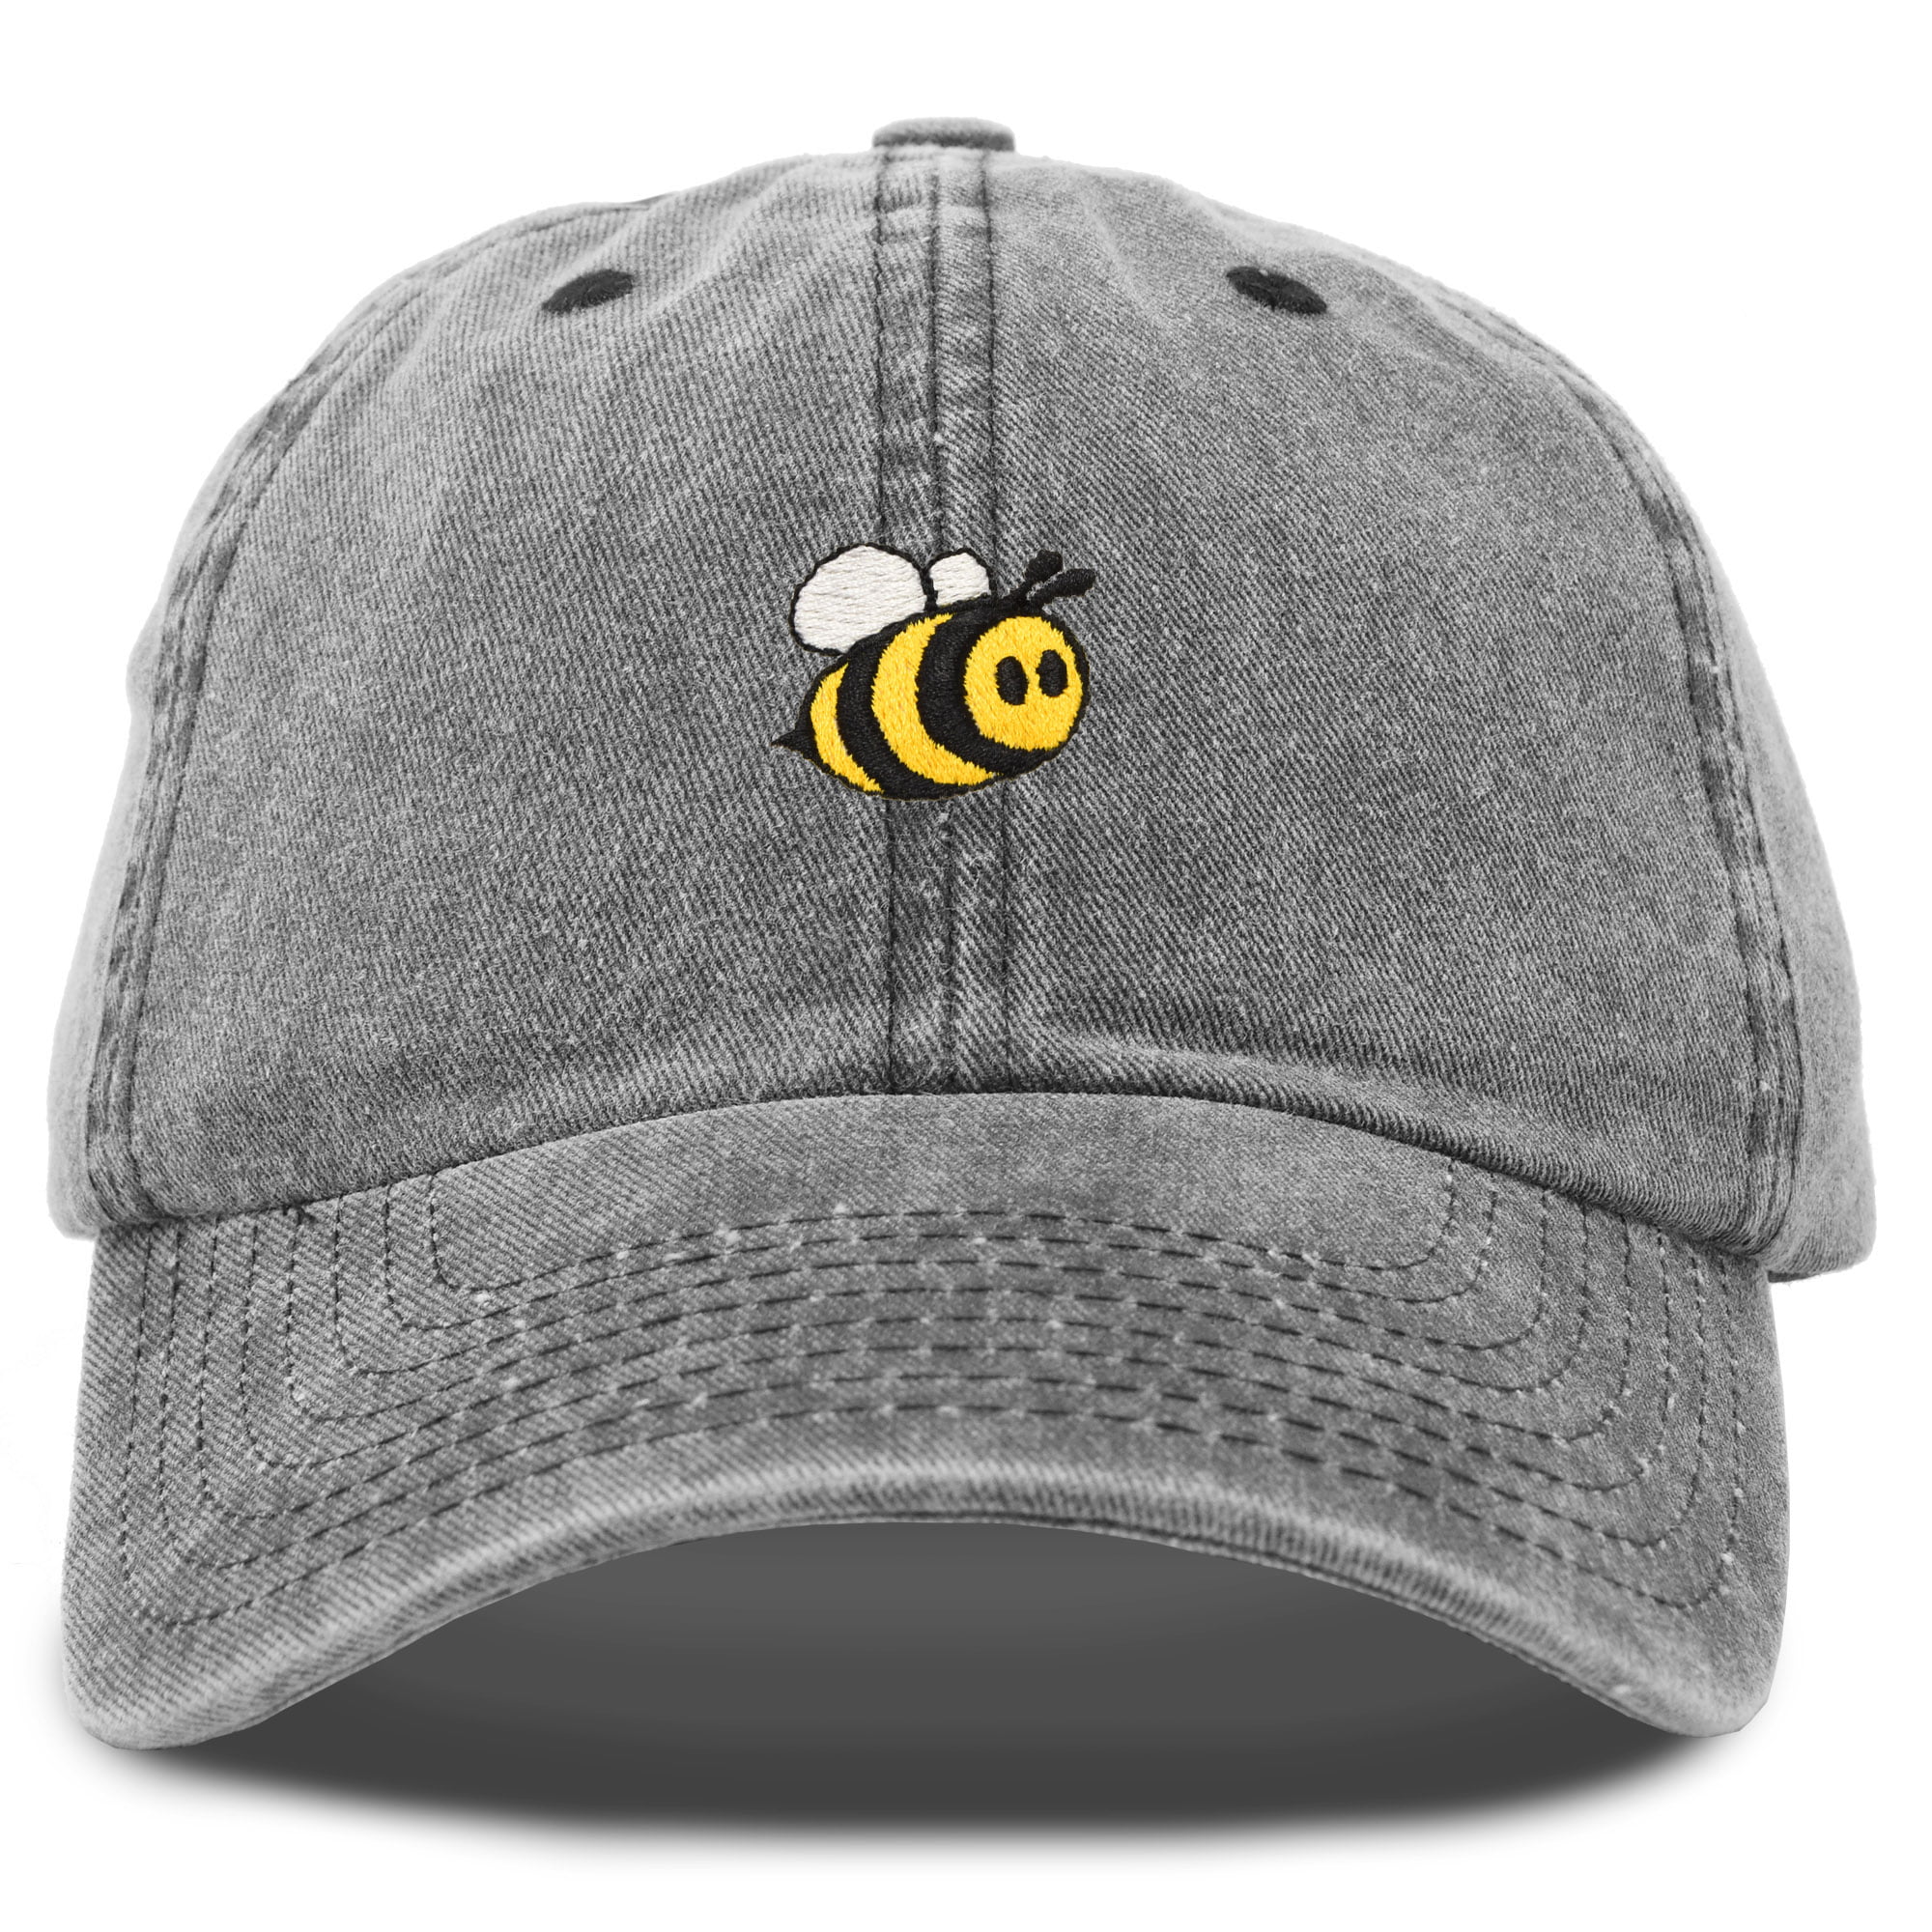 DALIX Bumble Bee Baseball Cap Dad Hat Embroidered Womens Girls in Black ...